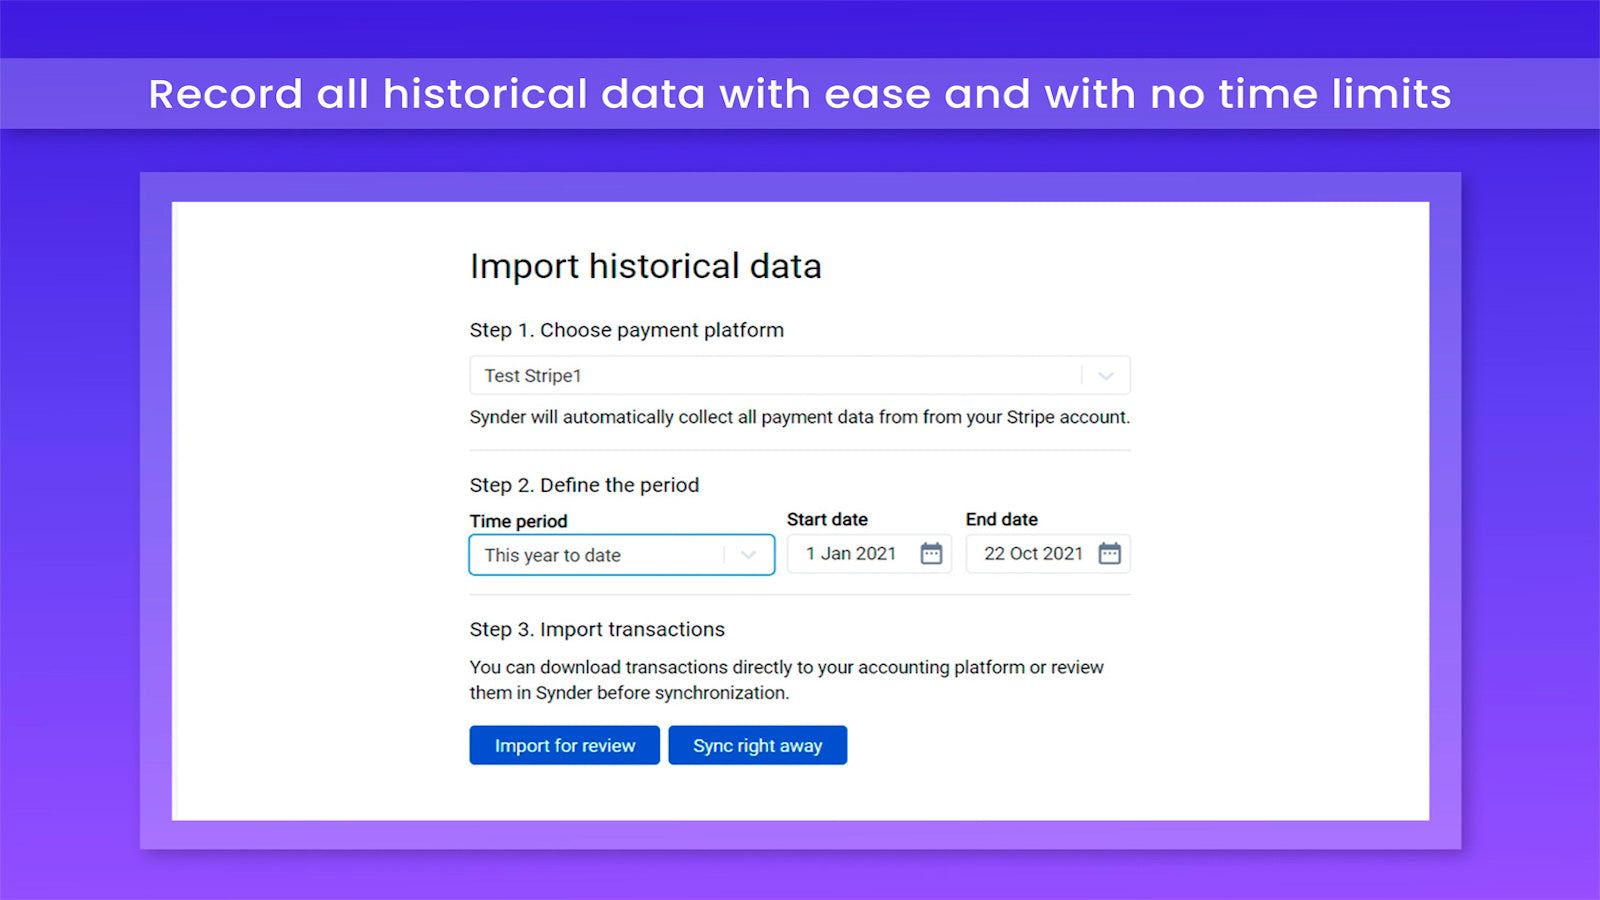 Post historical data with easy and with no time limits